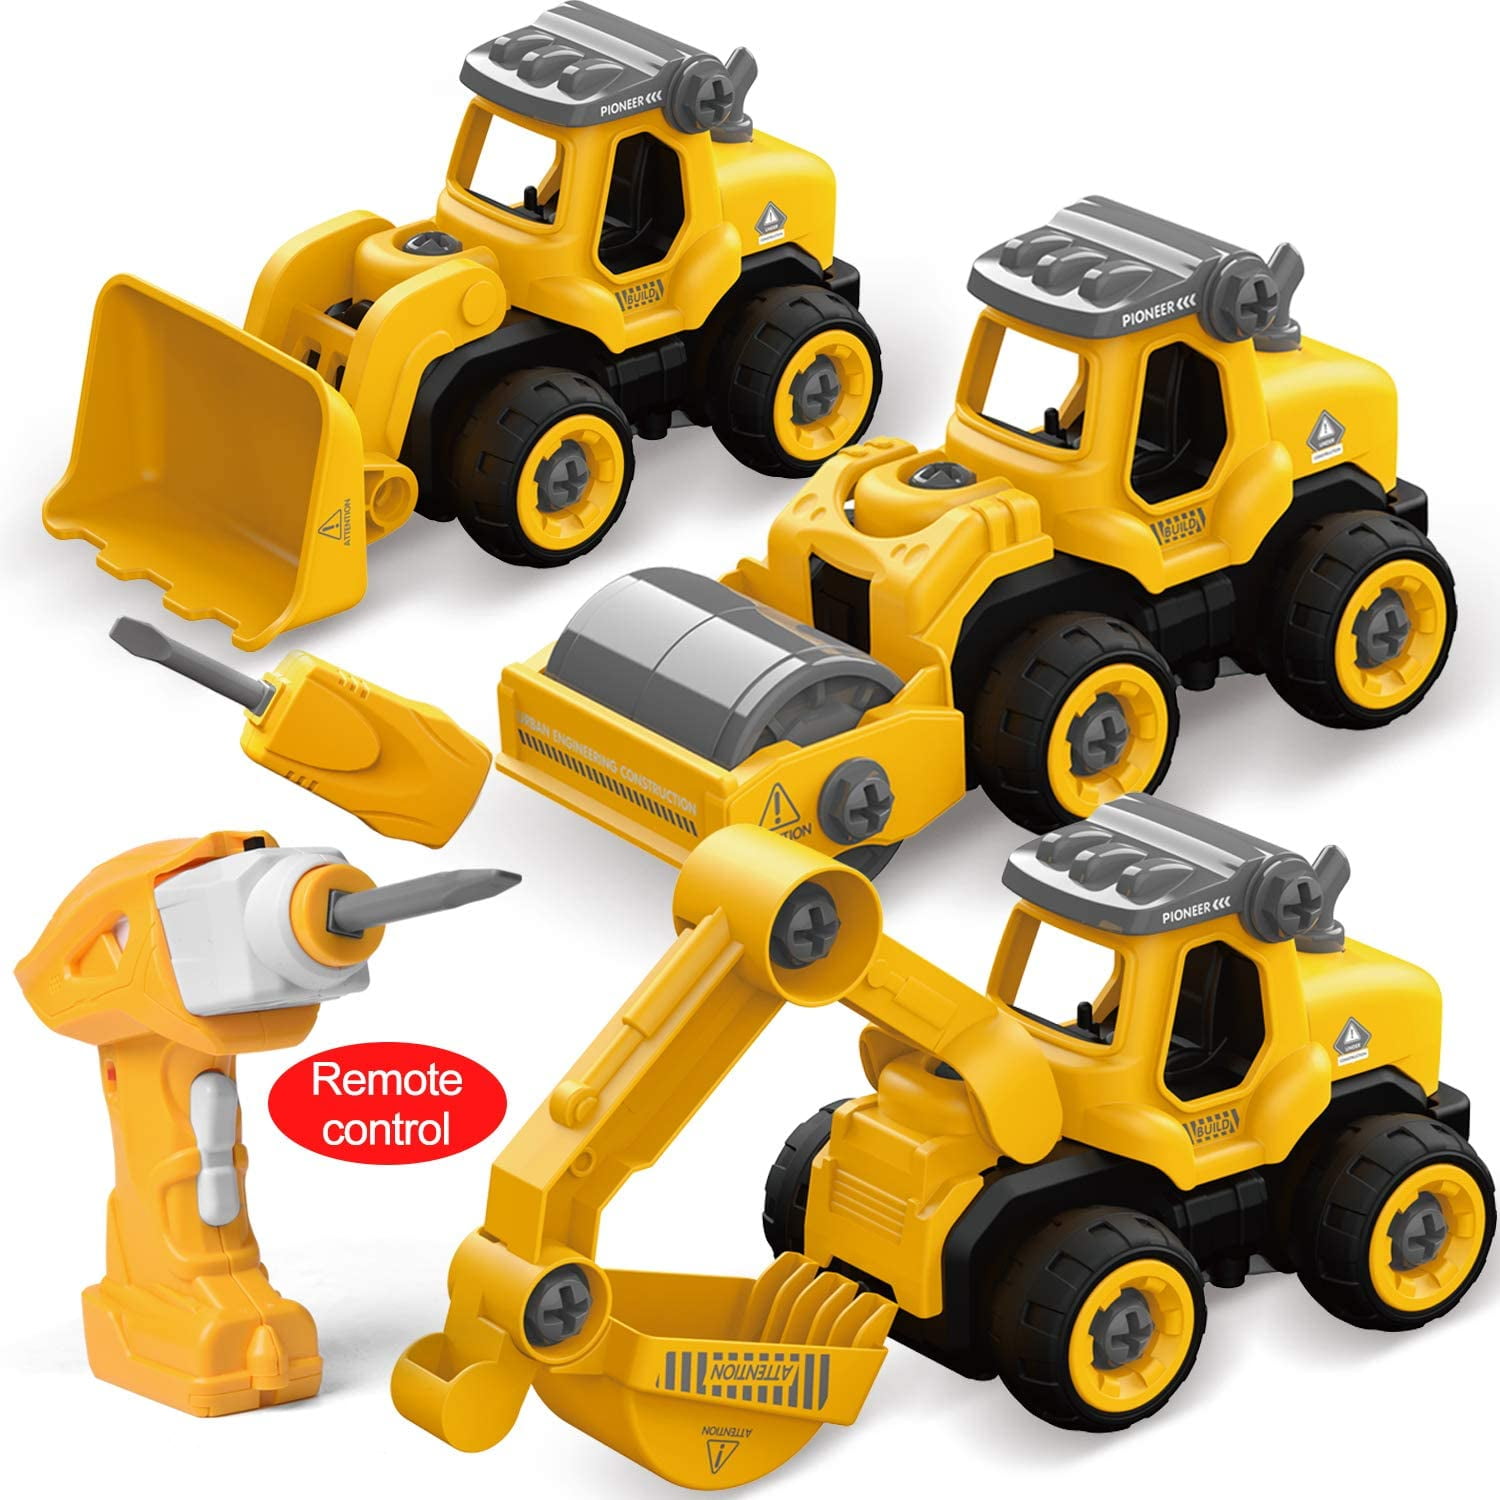 Take Apart Toys for Boys,STEM Dump Truck Toys for 3 4 5 6 7 Year Old Boys and Girls with Drill Tool,Build Your Own Car Kit for Kids,Toy Cars for 3 Year Old Boys,Gifts for Kids